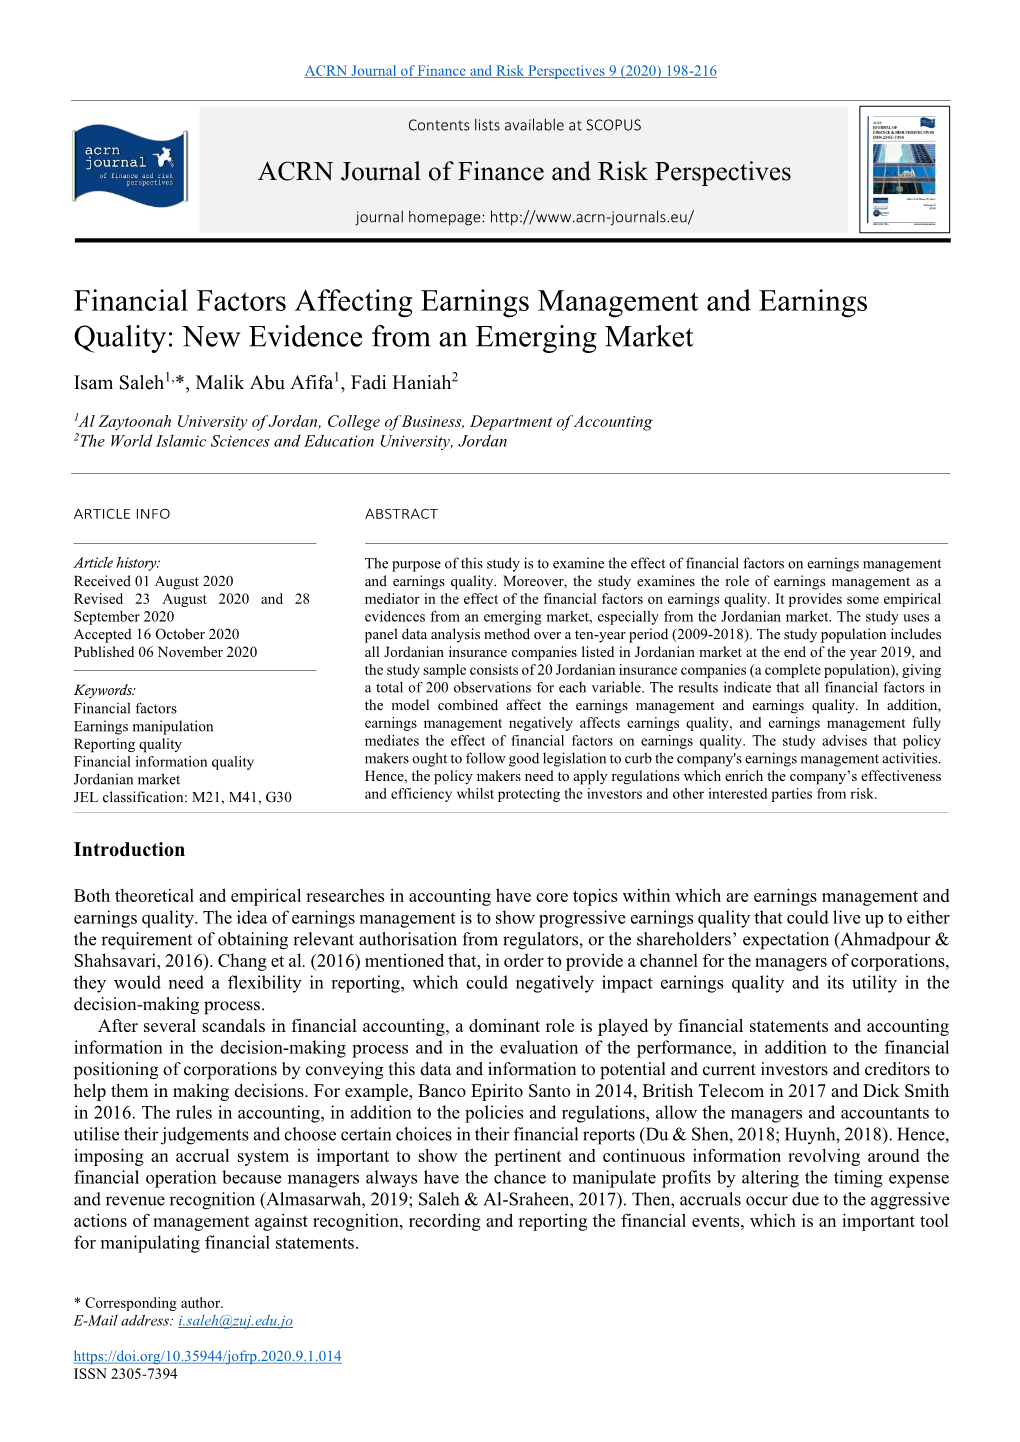 Financial Factors Affecting Earnings Management and Earnings Quality: New Evidence from an Emerging Market Isam Saleh1,*, Malik Abu Afifa1, Fadi Haniah2